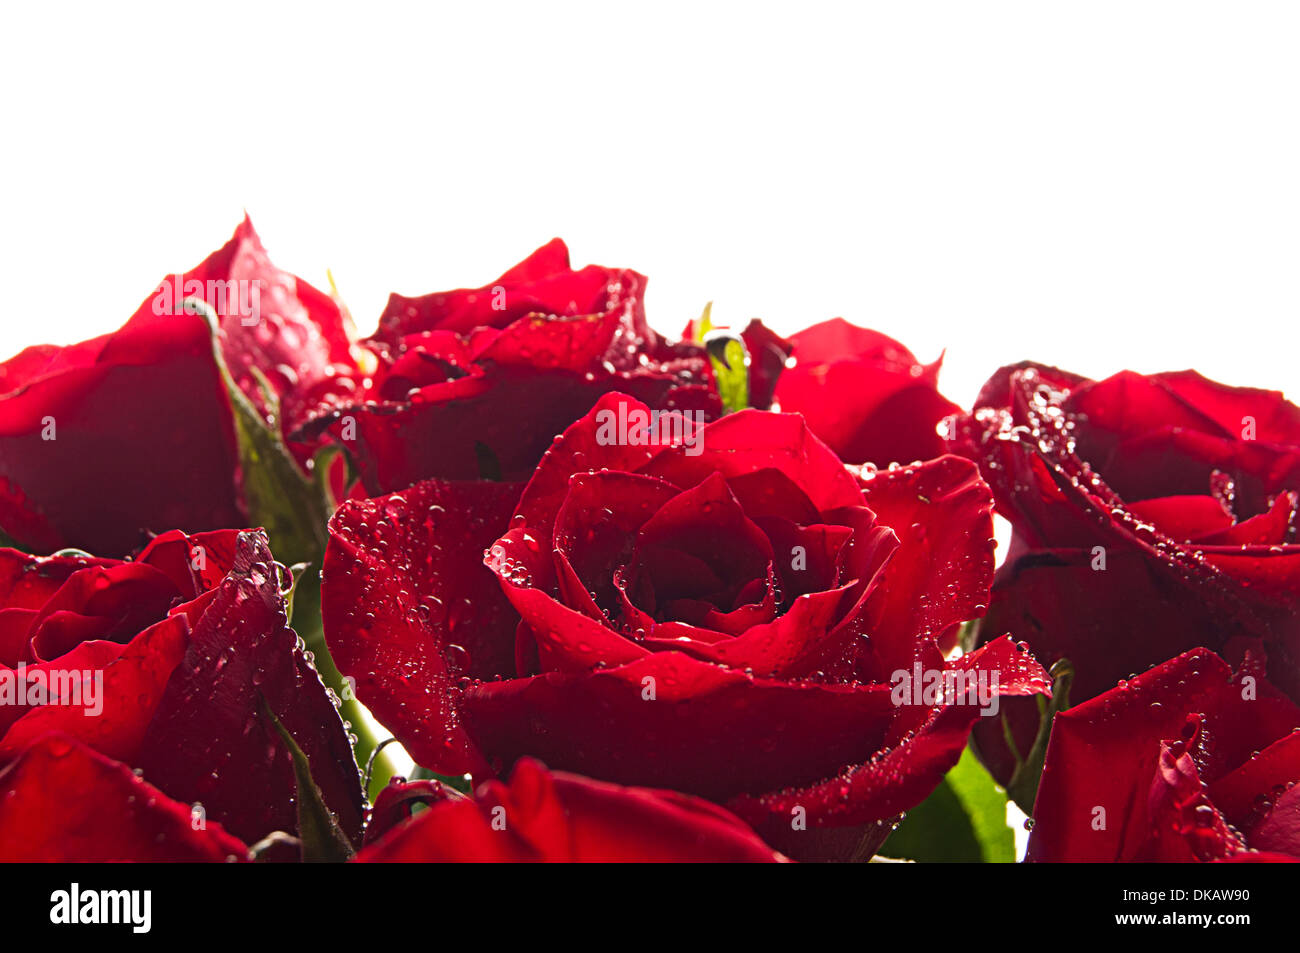 bunch of red roses Stock Photo